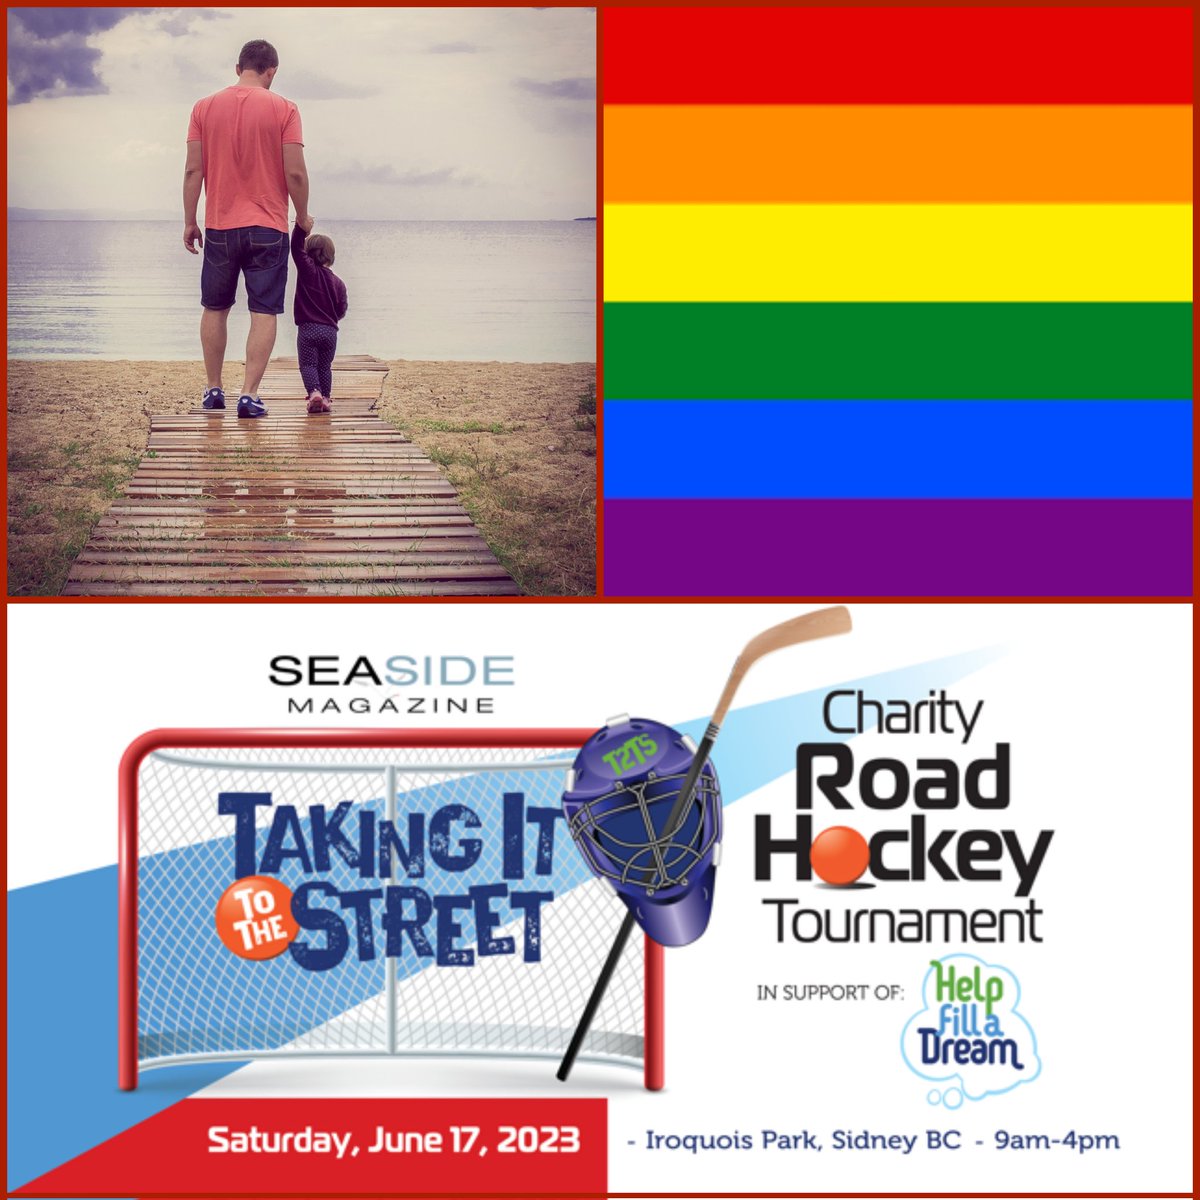 We've got @SeasideMagazine #TakingItToTheStreet fundraiser for @HelpFillADream, and @MySidneyBC #SidneyPride on today, and then #FathersDay tomorrow - #Sidney is BUMPING with activity and people! 😁👍#yyjevents